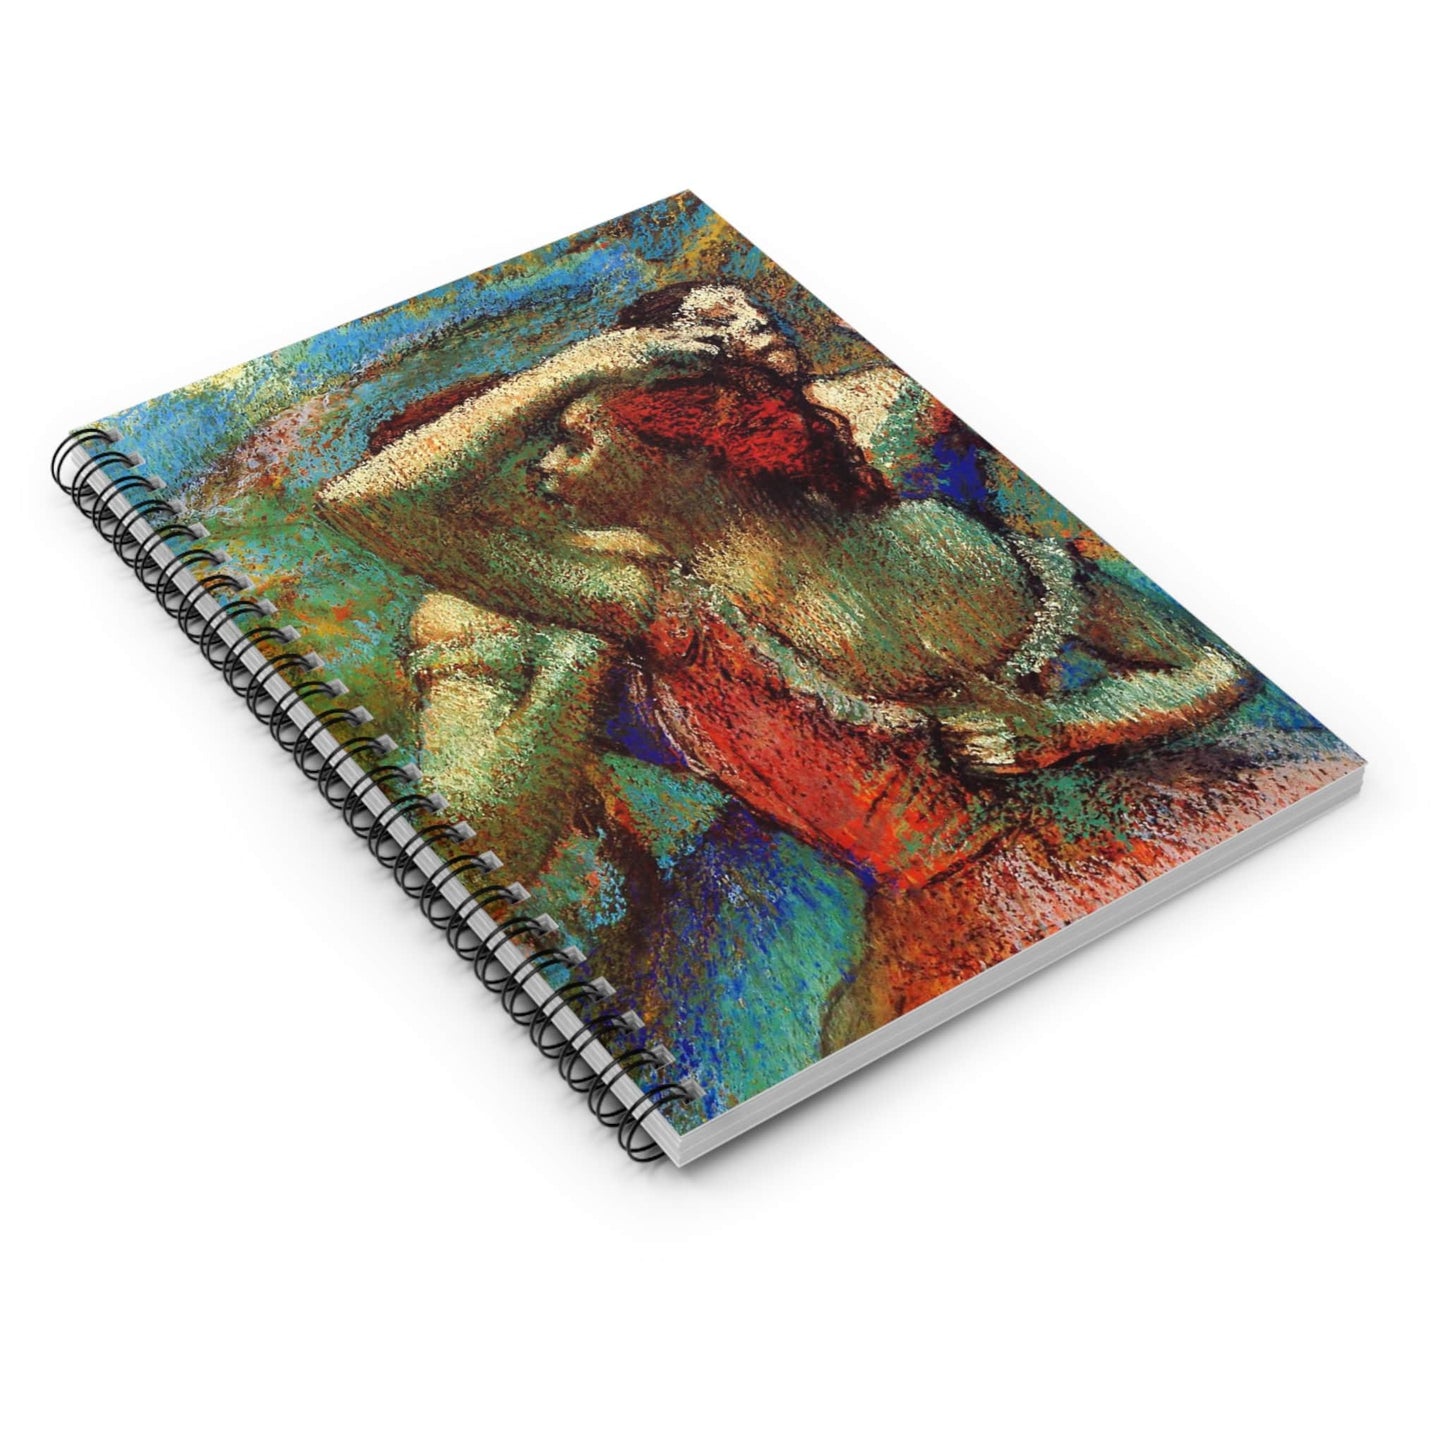 Impressionist Spiral Notebook Laying Flat on White Surface